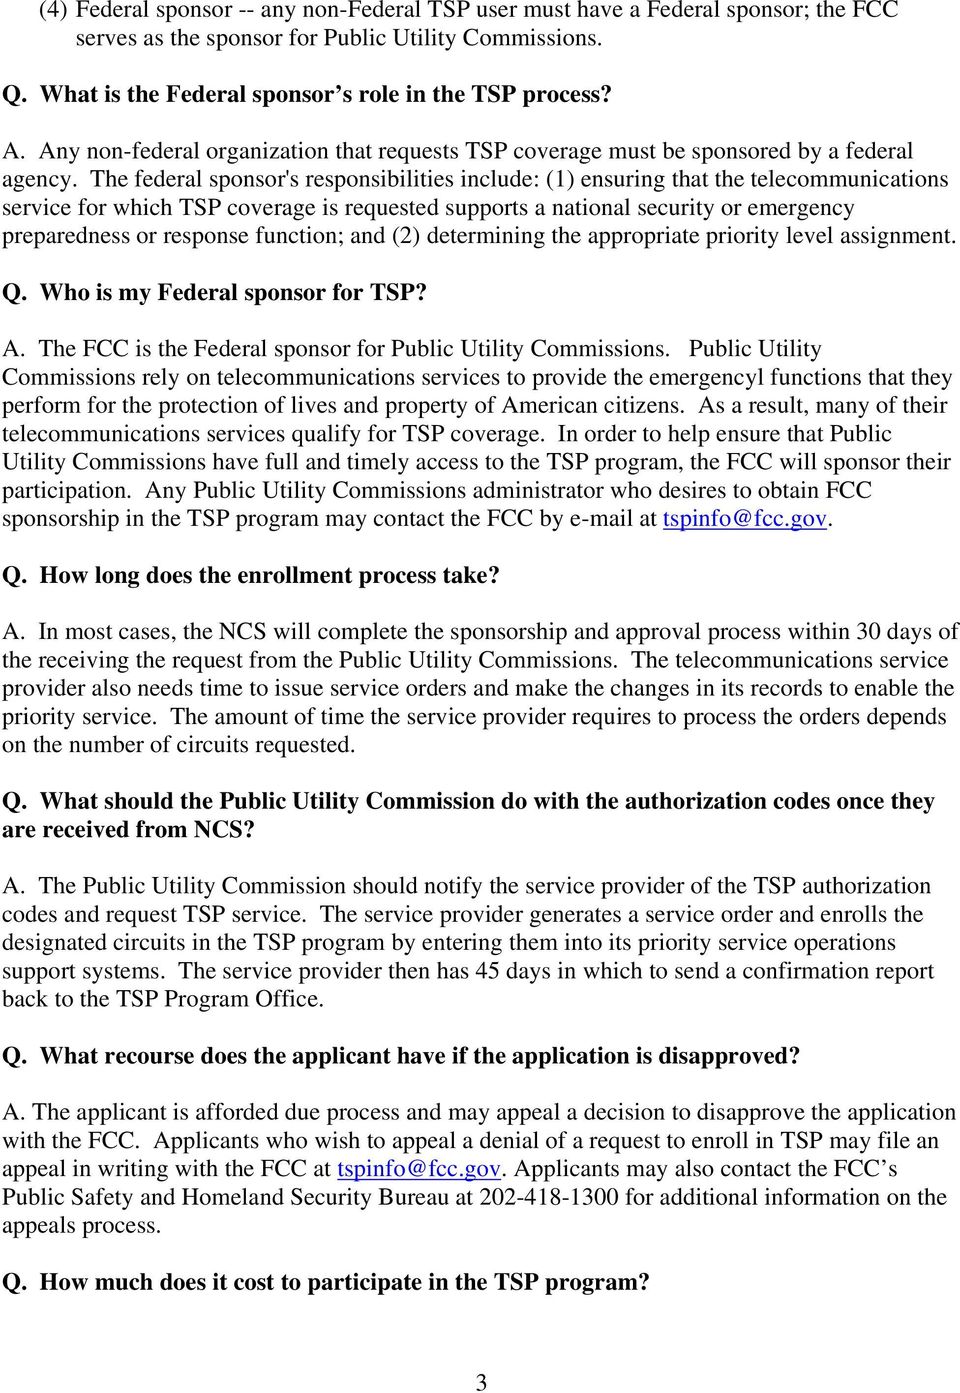 The federal sponsor's responsibilities include: (1) ensuring that the telecommunications service for which TSP coverage is requested supports a national security or emergency preparedness or response